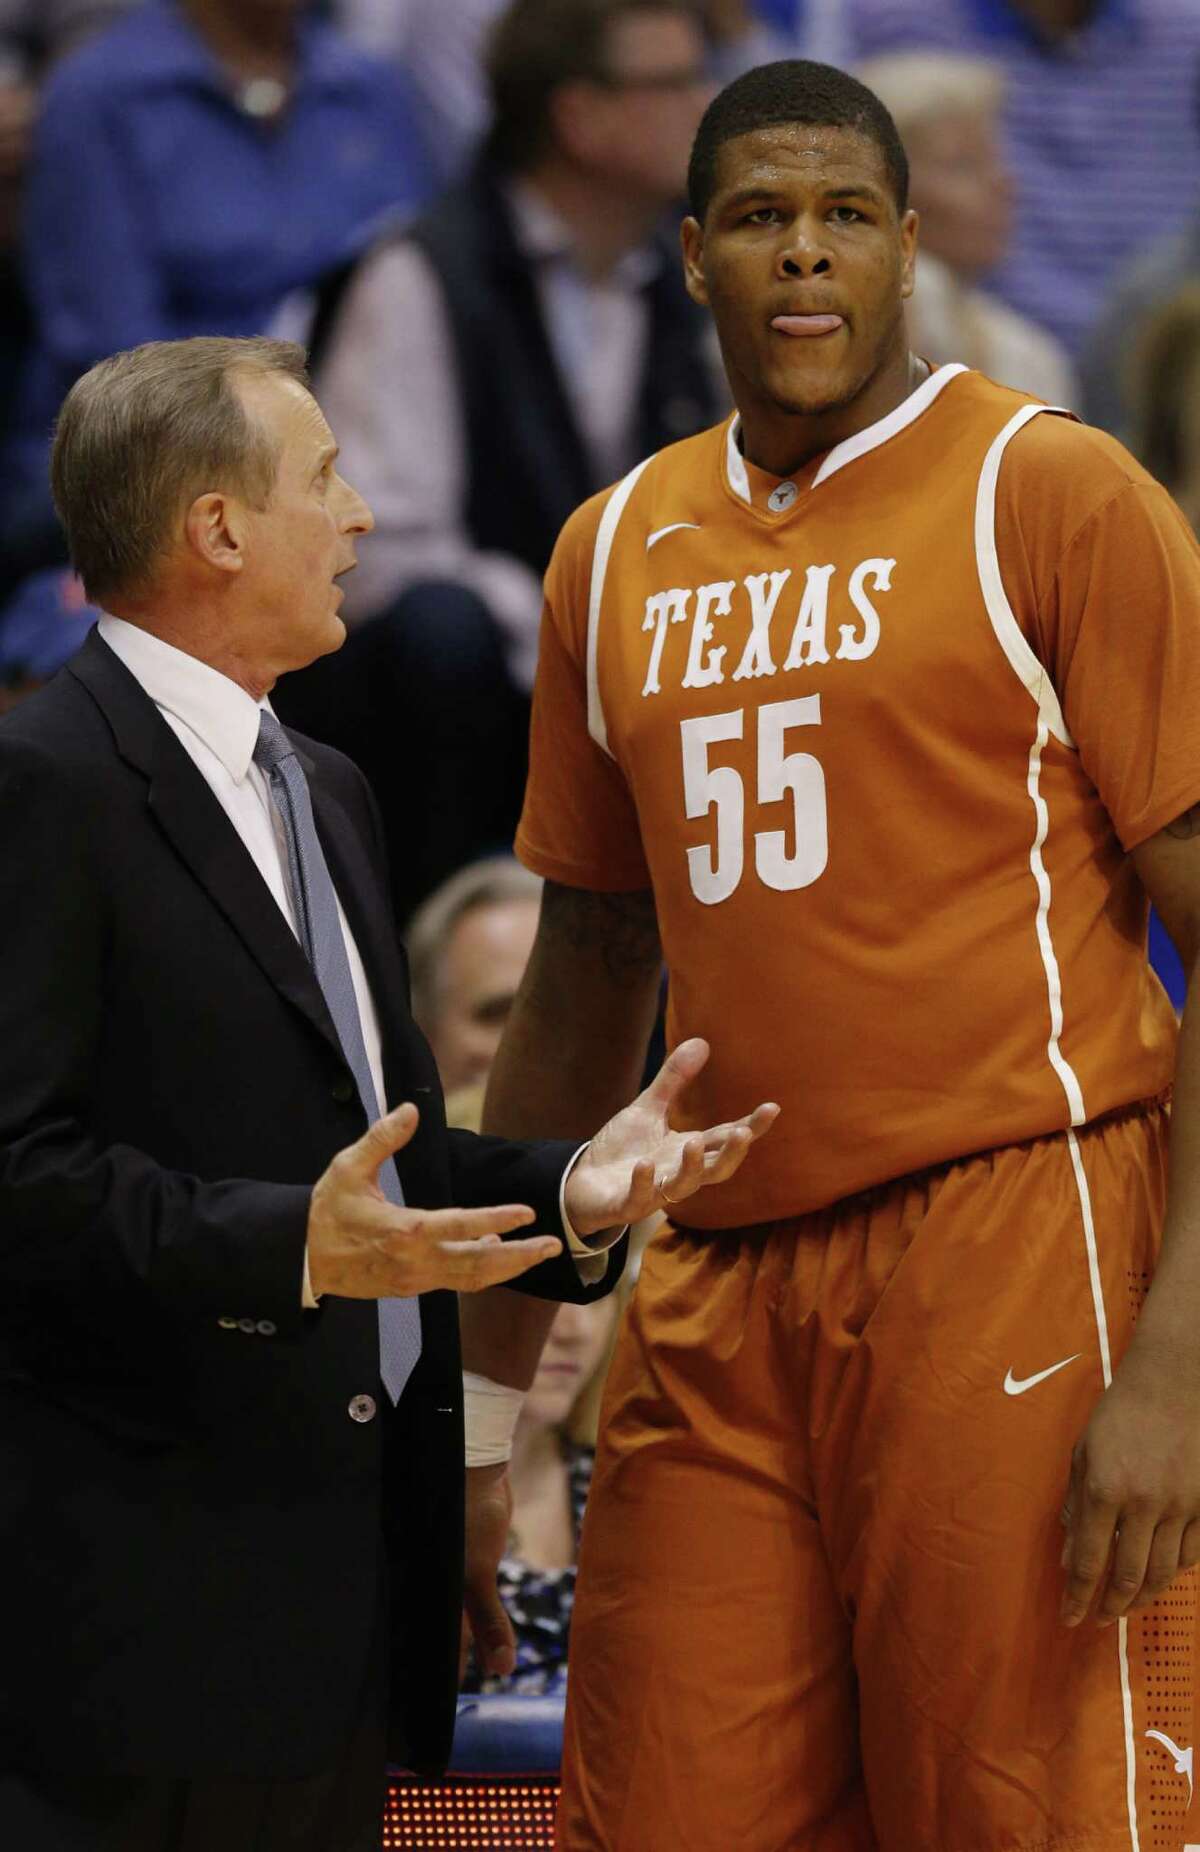 Texas head coach Rick Barnes and center Cameron Ridley (55) during the second half of an NCAA college basketball game against Kansas in Lawrence, Kan., Saturday, Feb. 22, 2014. Kansas defeated Texas 85-54. (AP Photo/Orlin Wagner)